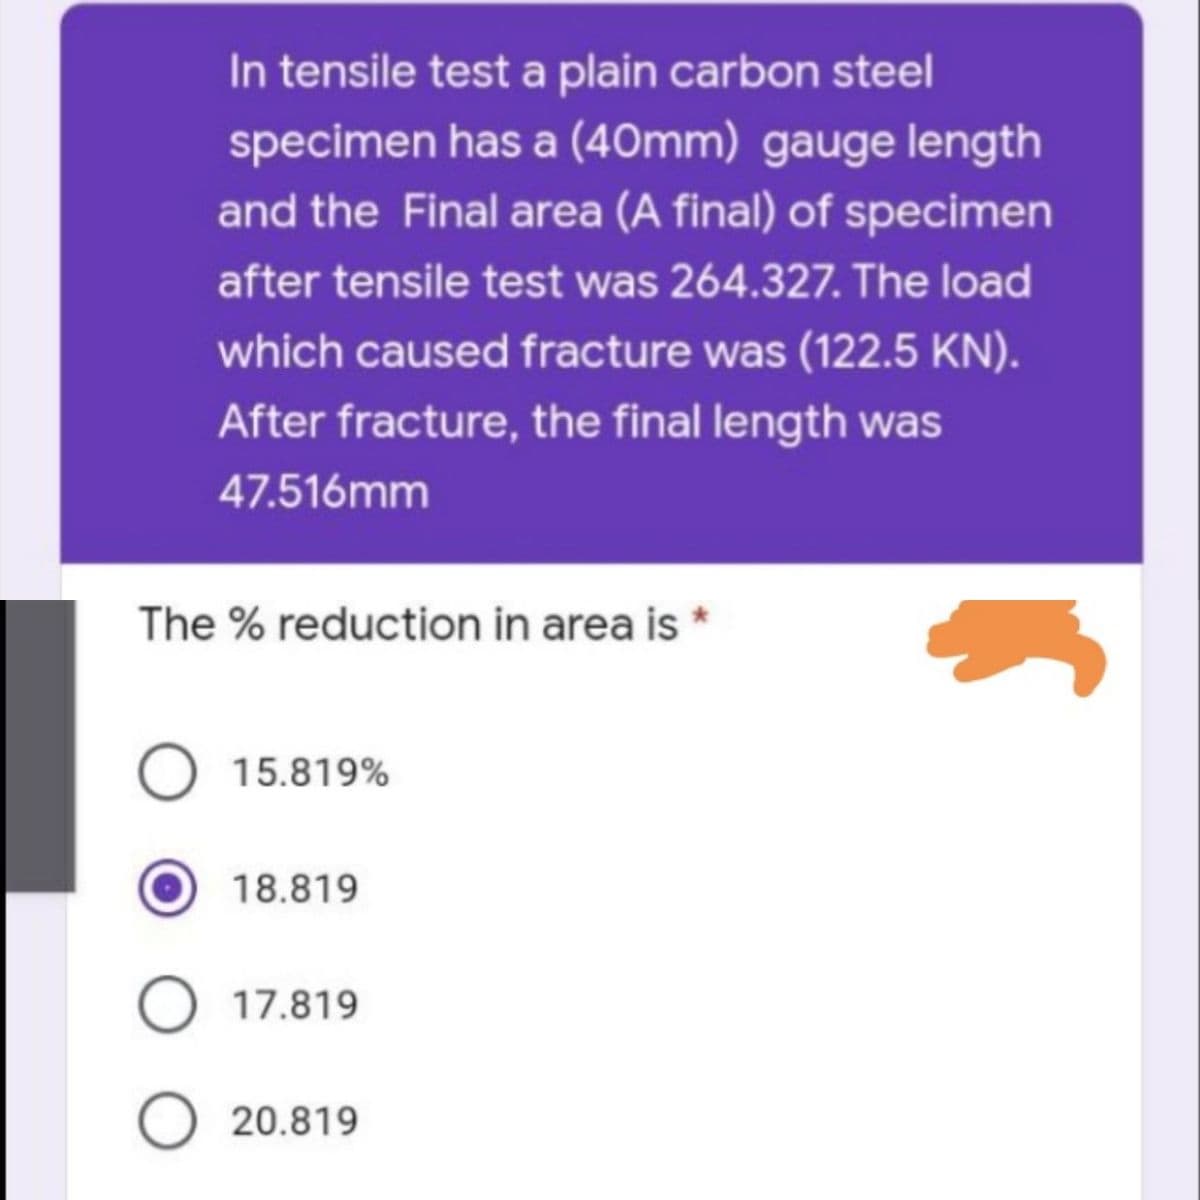 In tensile test a plain carbon steel
specimen has a (40mm) gauge length
and the Final area (A final) of specimen
after tensile test was 264.327. The load
which caused fracture was (122.5 KN).
After fracture, the final length was
47.516mm
The % reduction in area is *
O 15.819%
18.819
O 17.819
O 20.819